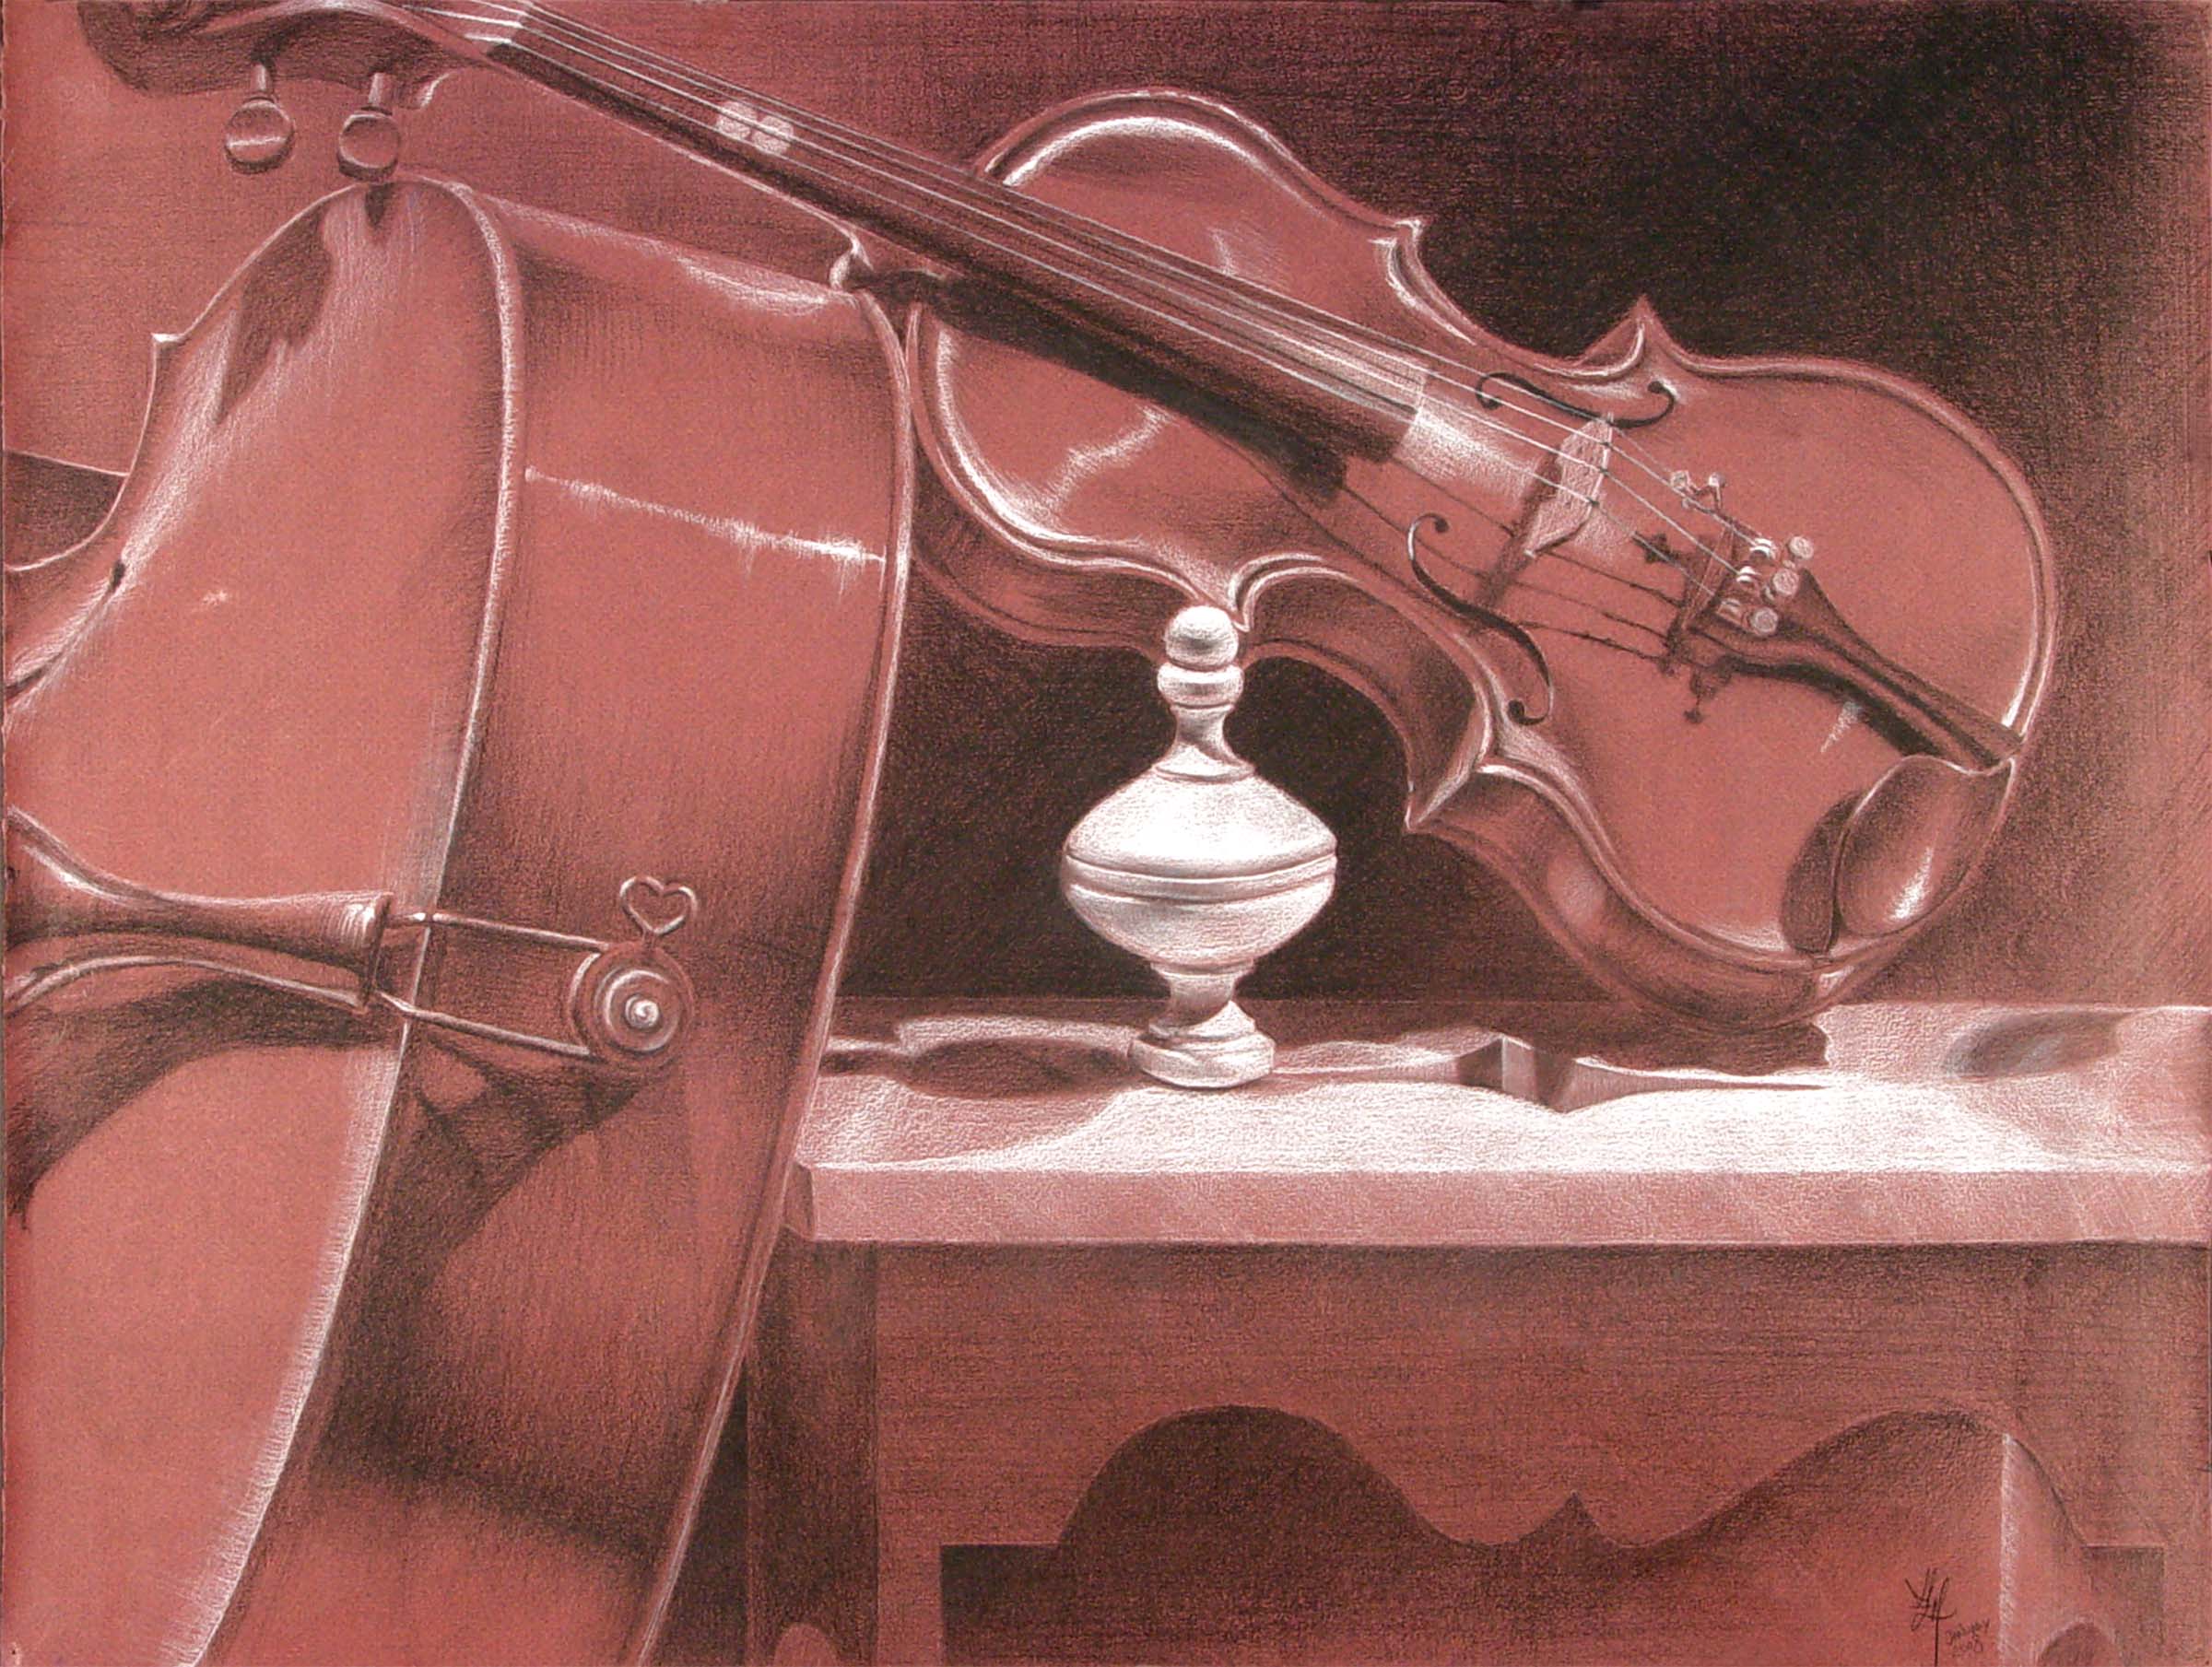 A drawing of a violin resting on a cello and framing a bottle that itself looks like something out of sheet music.